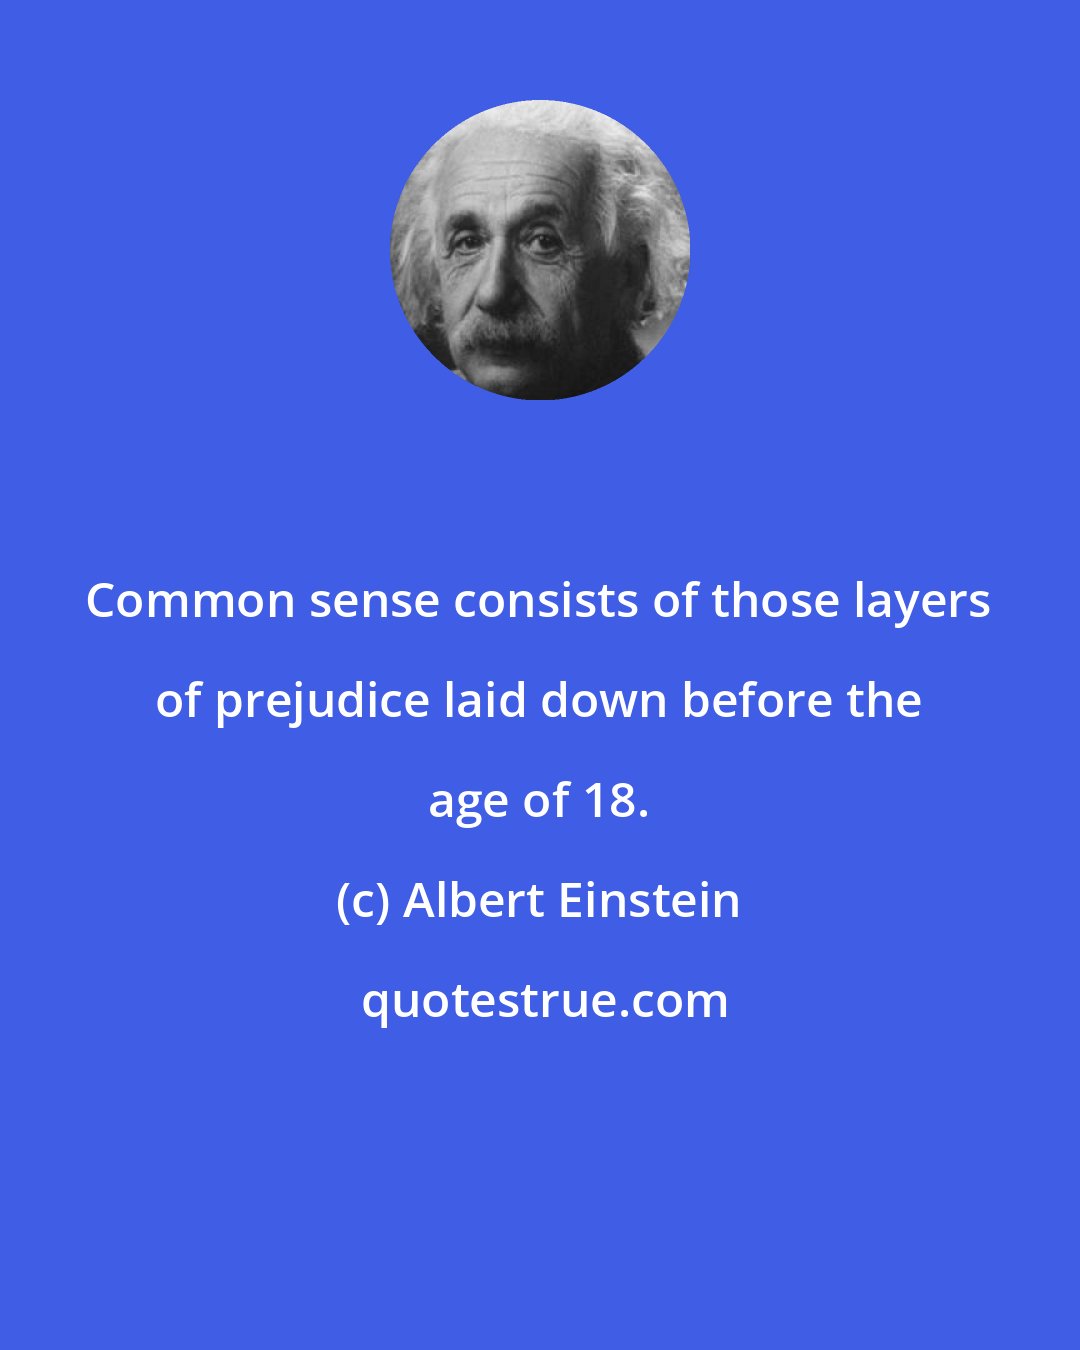 Albert Einstein: Common sense consists of those layers of prejudice laid down before the age of 18.